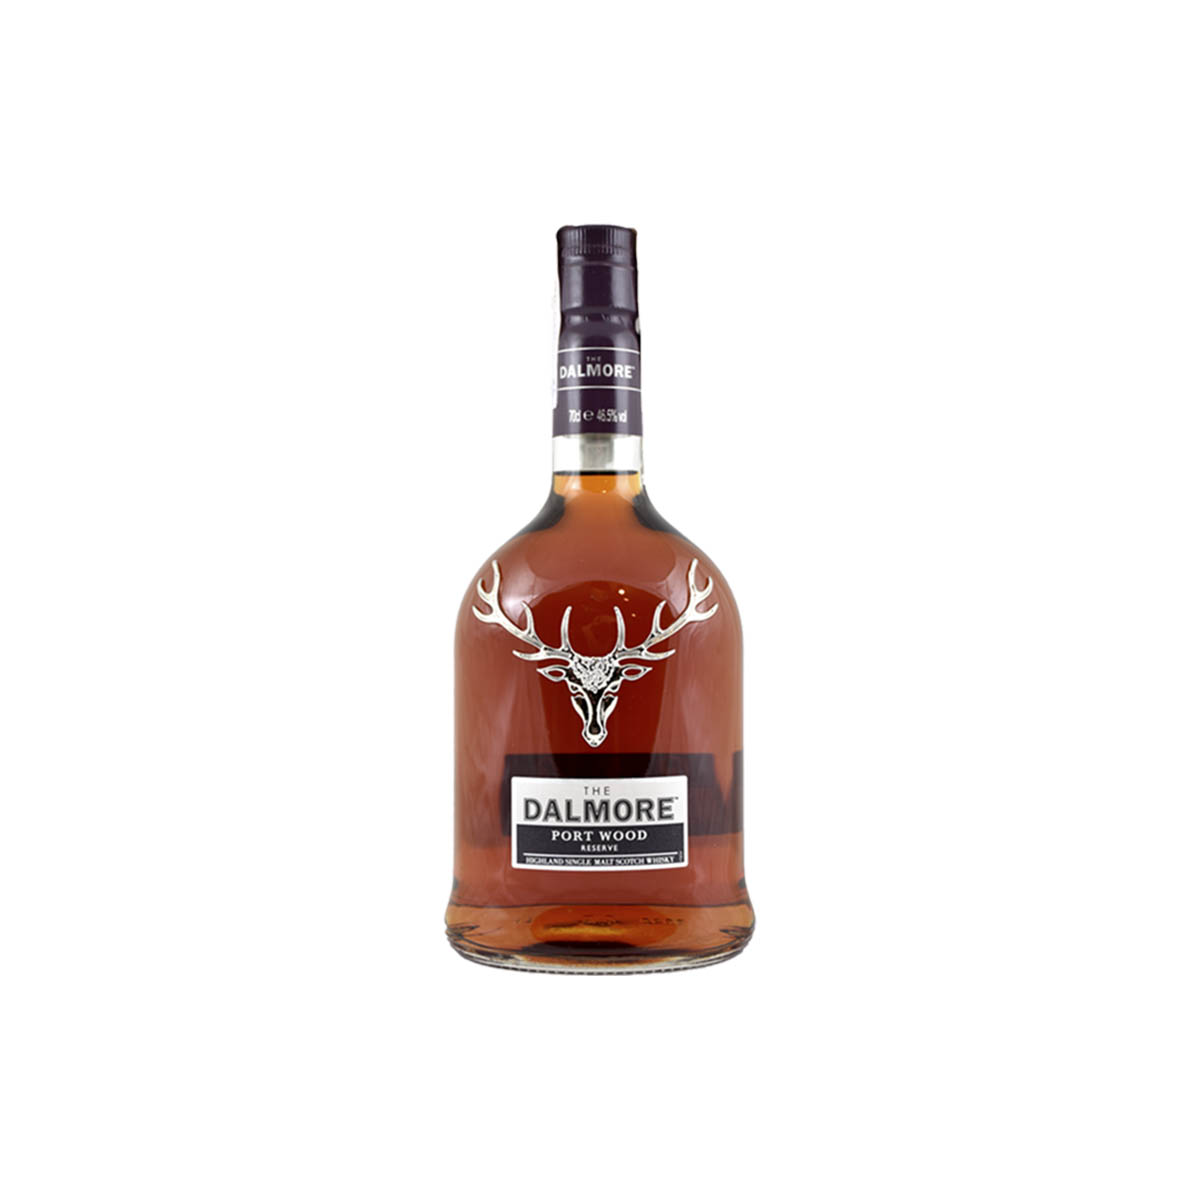 The Dalmore Port Wood Reserve (46.5%) - 30 ml.